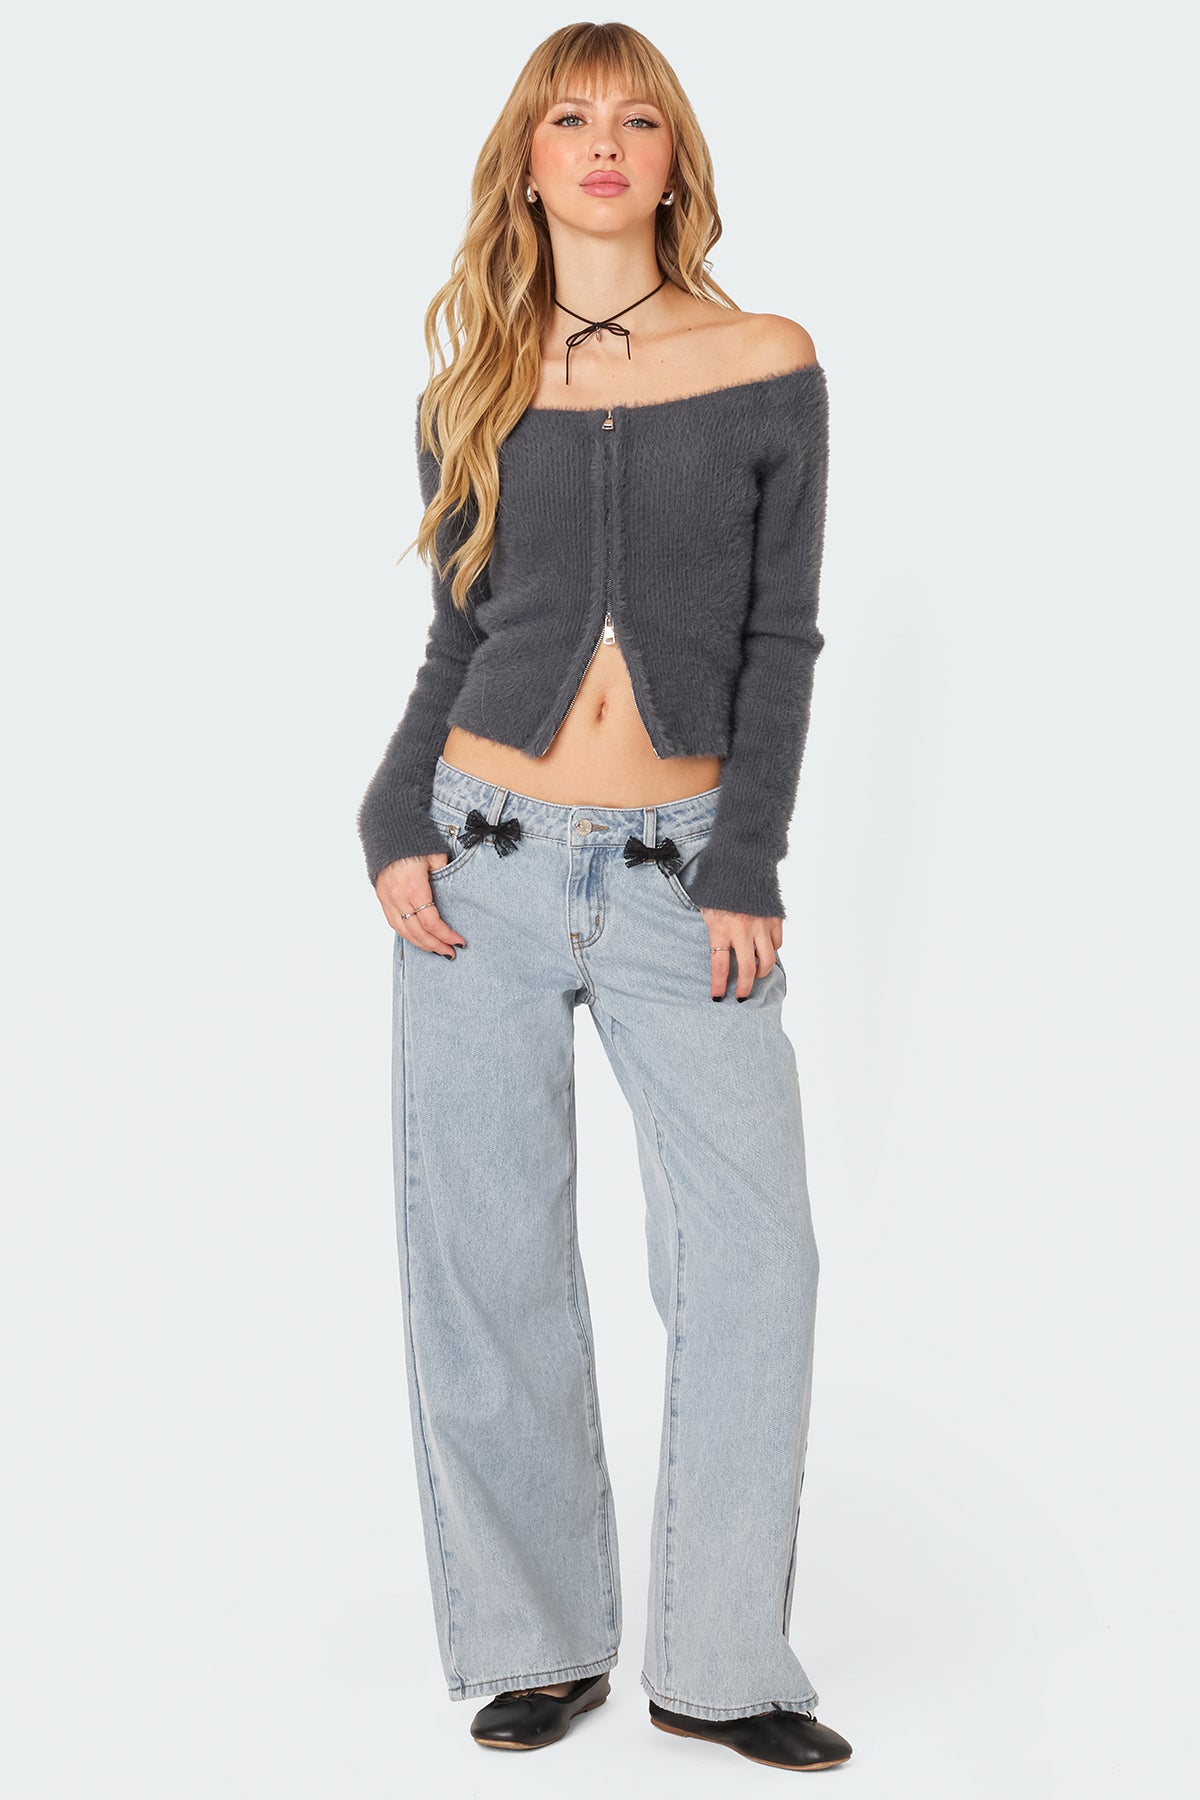 Sonia Off Shoulder Fuzzy Knit Top